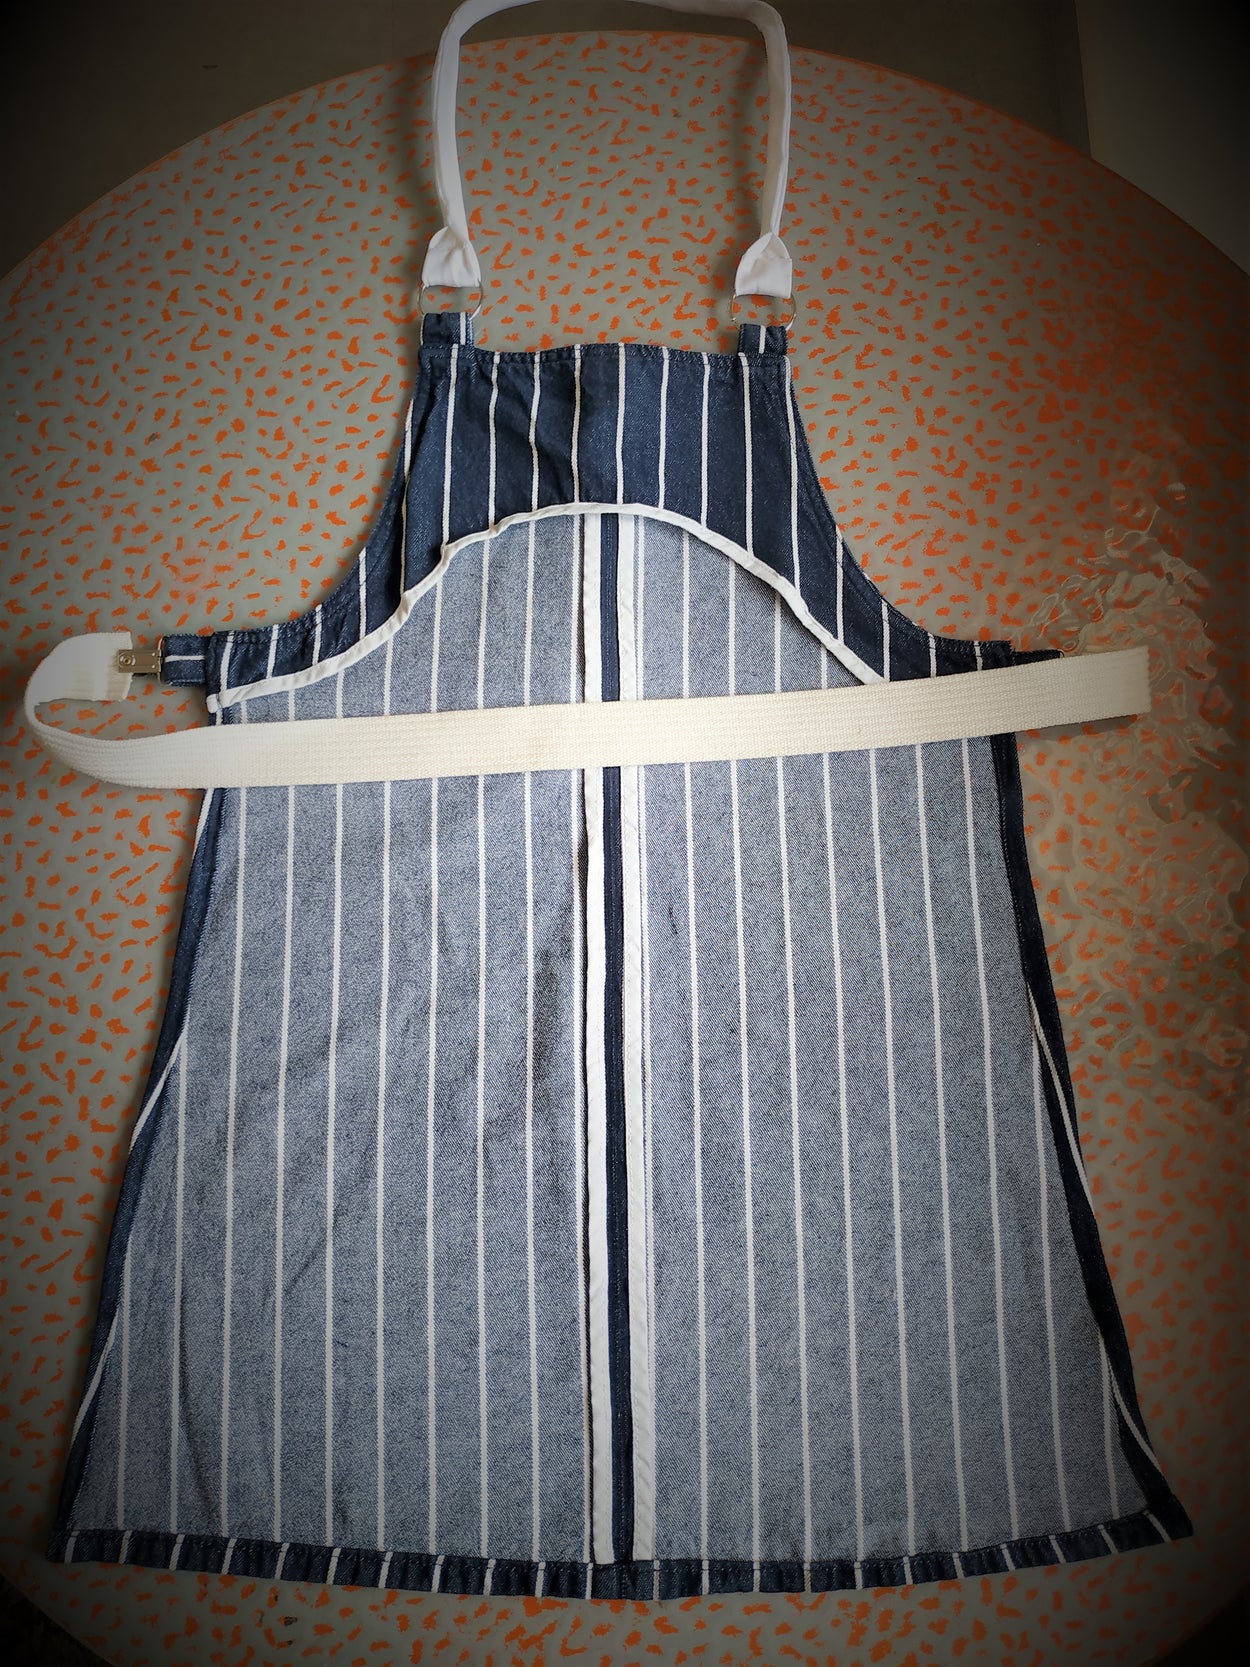 A set of denim aprons for HER and HIM.